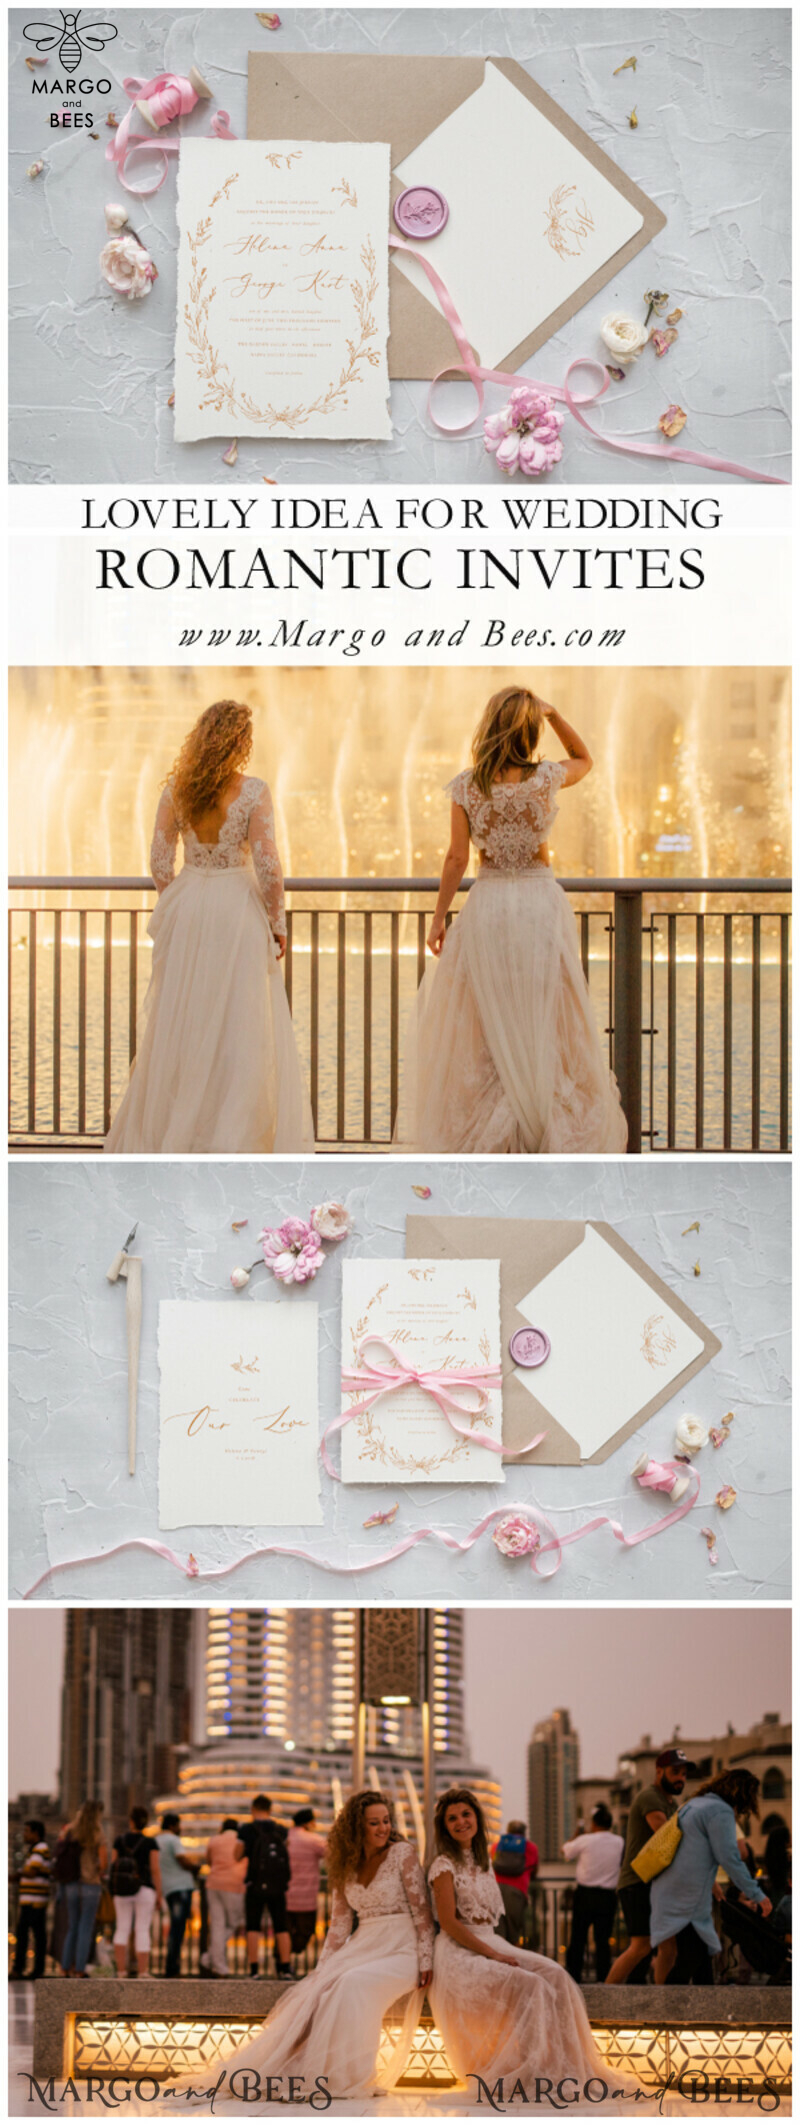 Create the Perfect Wedding with Minimalistic and Modern Invitations, Elegant Handmade Invites, and Bespoke Stationery: Romantic Wedding Cards for Your Special Day-3